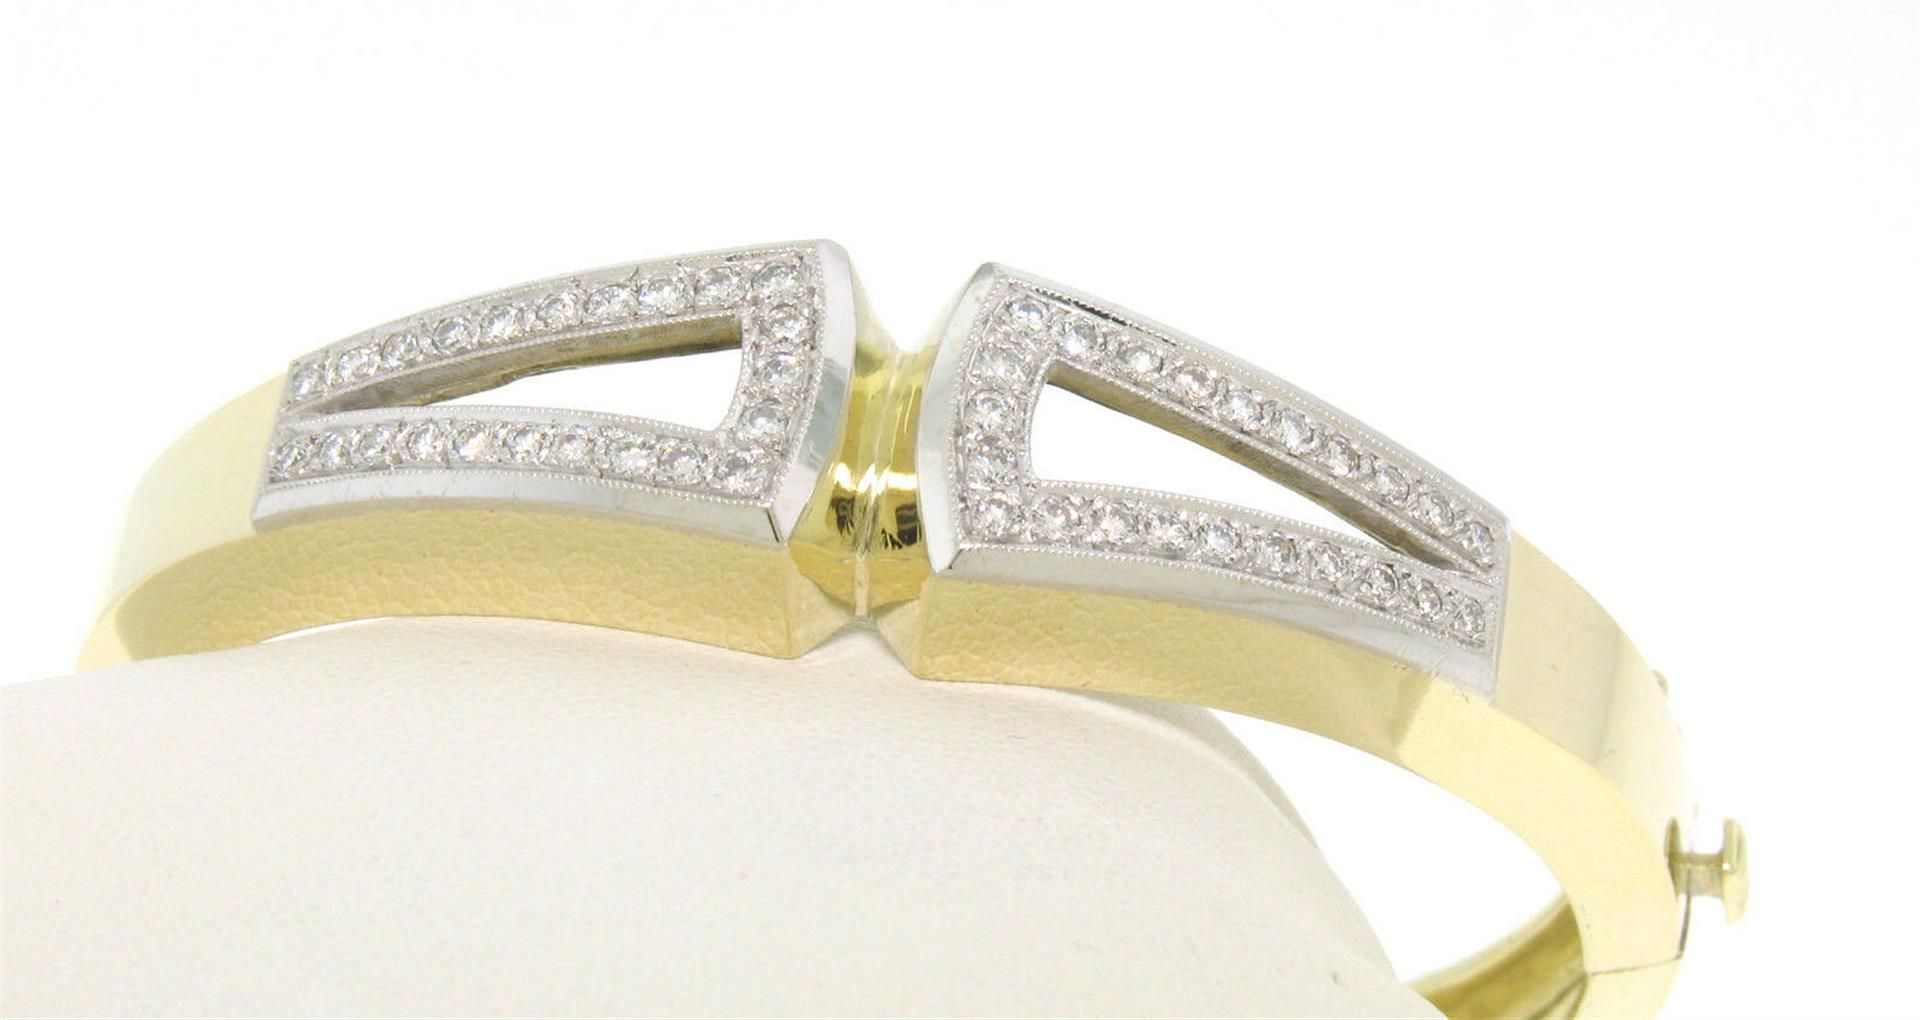 Estate 14K Solid Two Tone Gold Hinged Open Bangle Bracelet with Pave Diamonds - Image 2 of 8